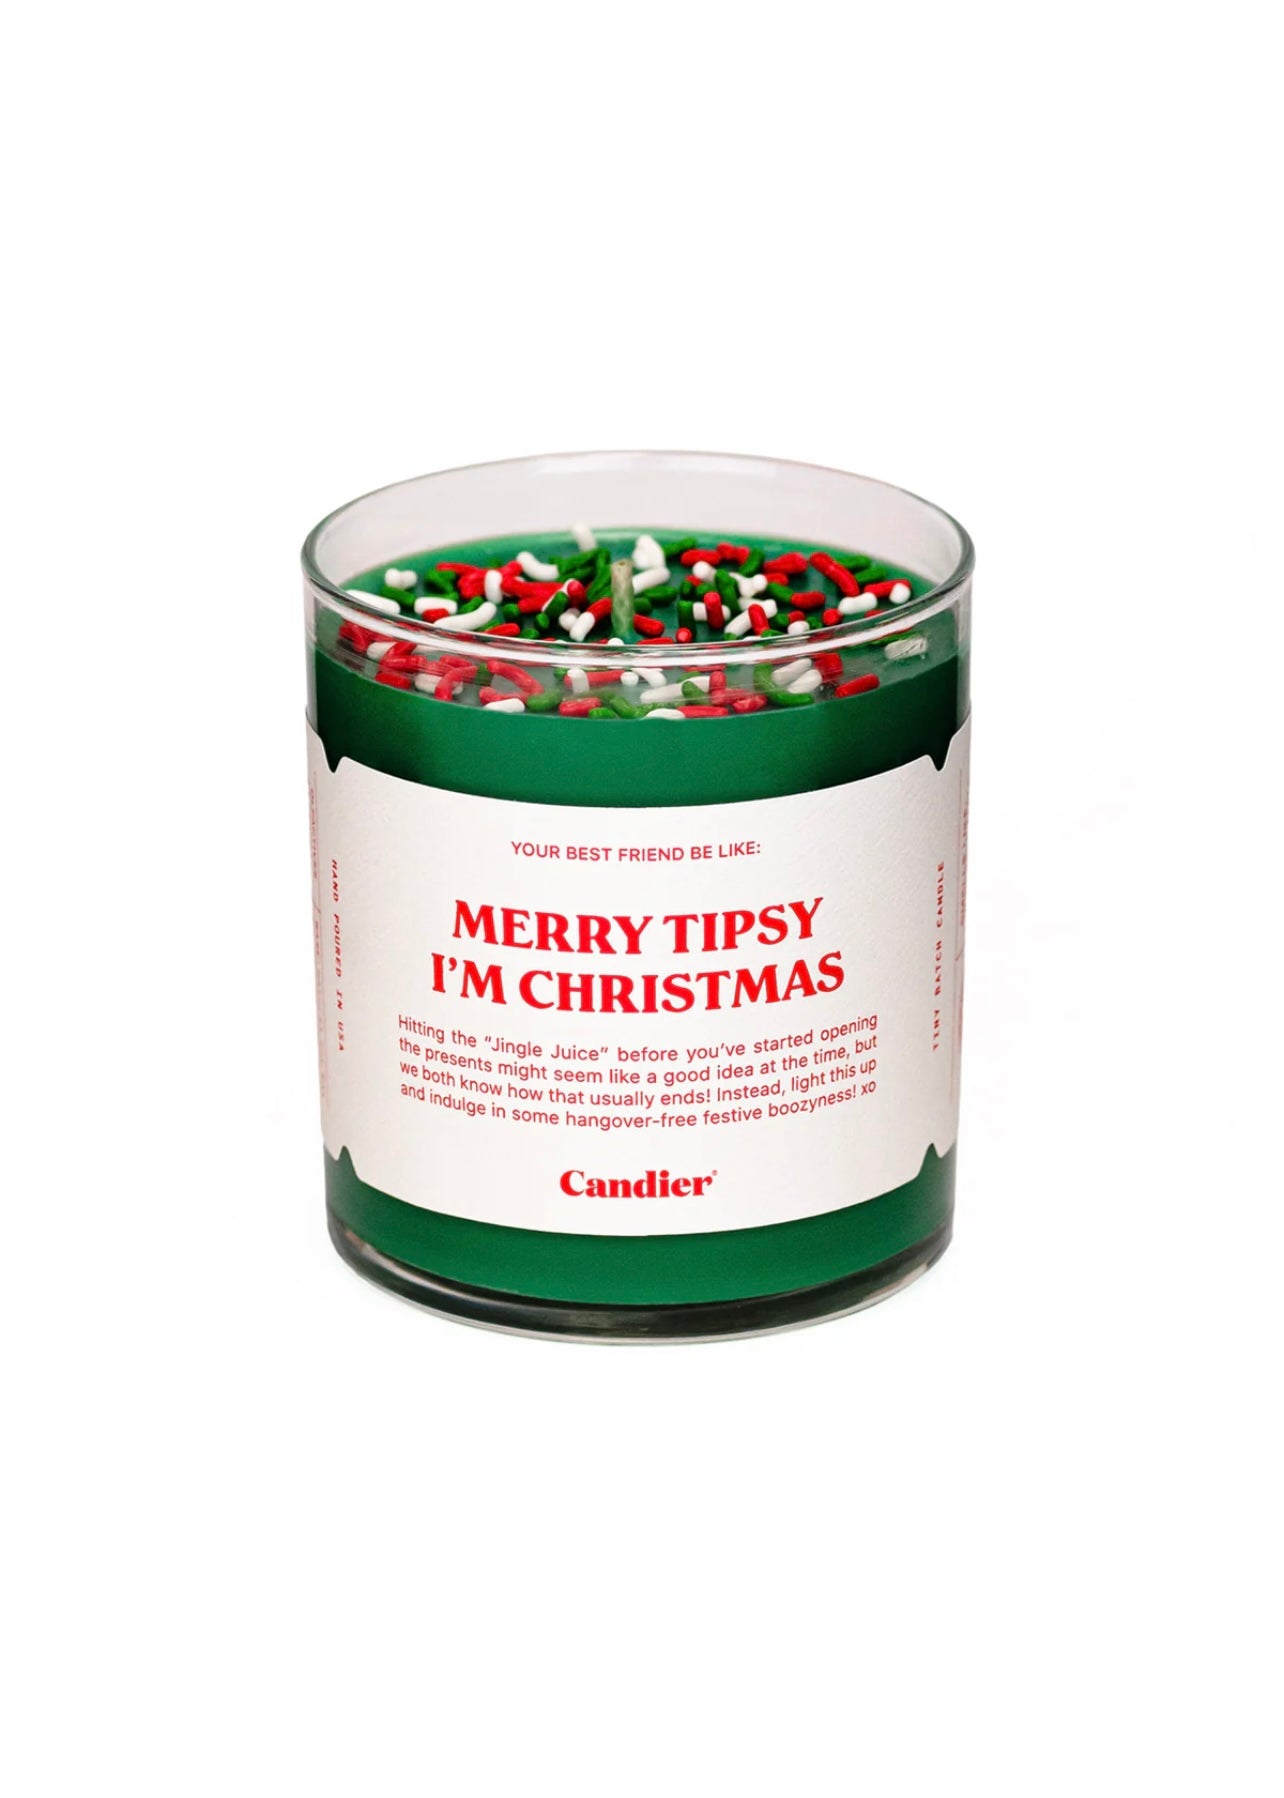 Candier Candles "Merry Tipsy I'm Christmas"